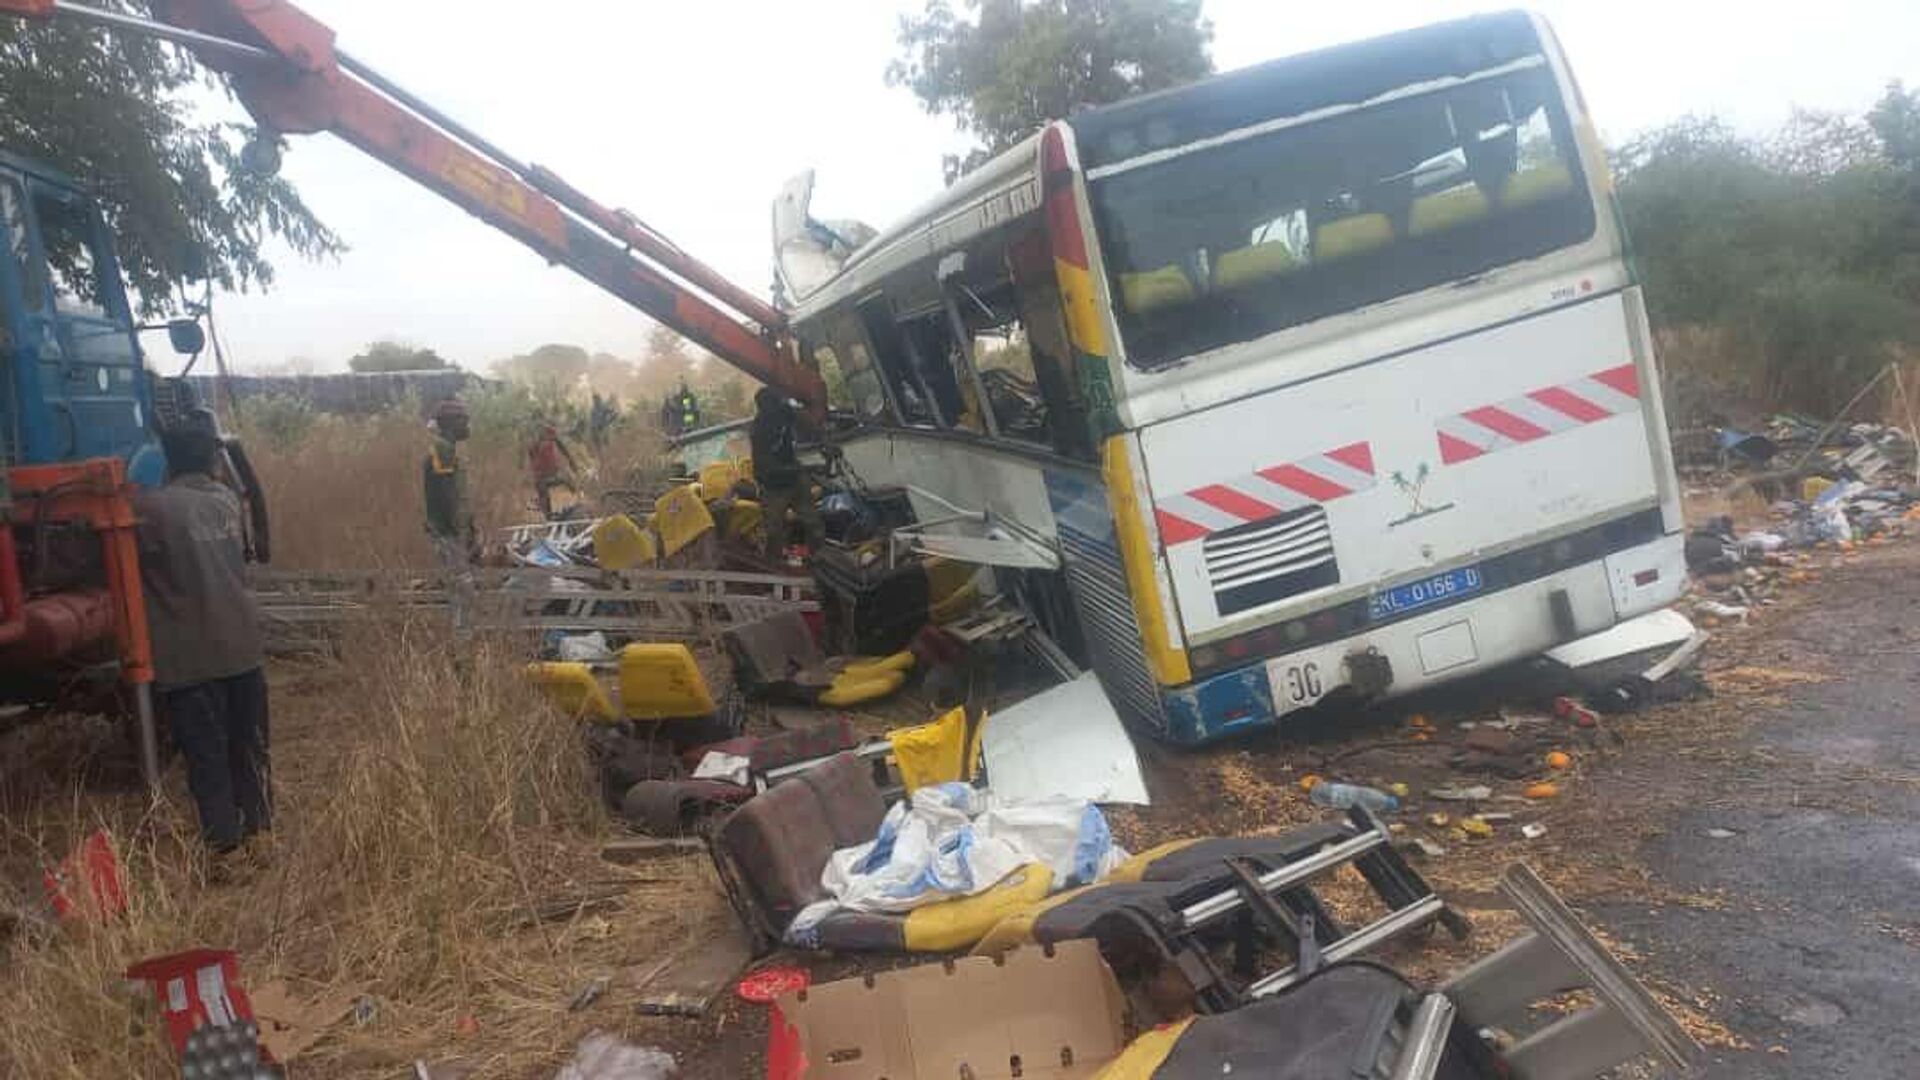 A general view of the scene of a bus accident in Kaffrine, central Senegal, on January 8, 2023 where at least 38 people have died and scores were injured when two buses collided. - Sputnik International, 1920, 08.01.2023